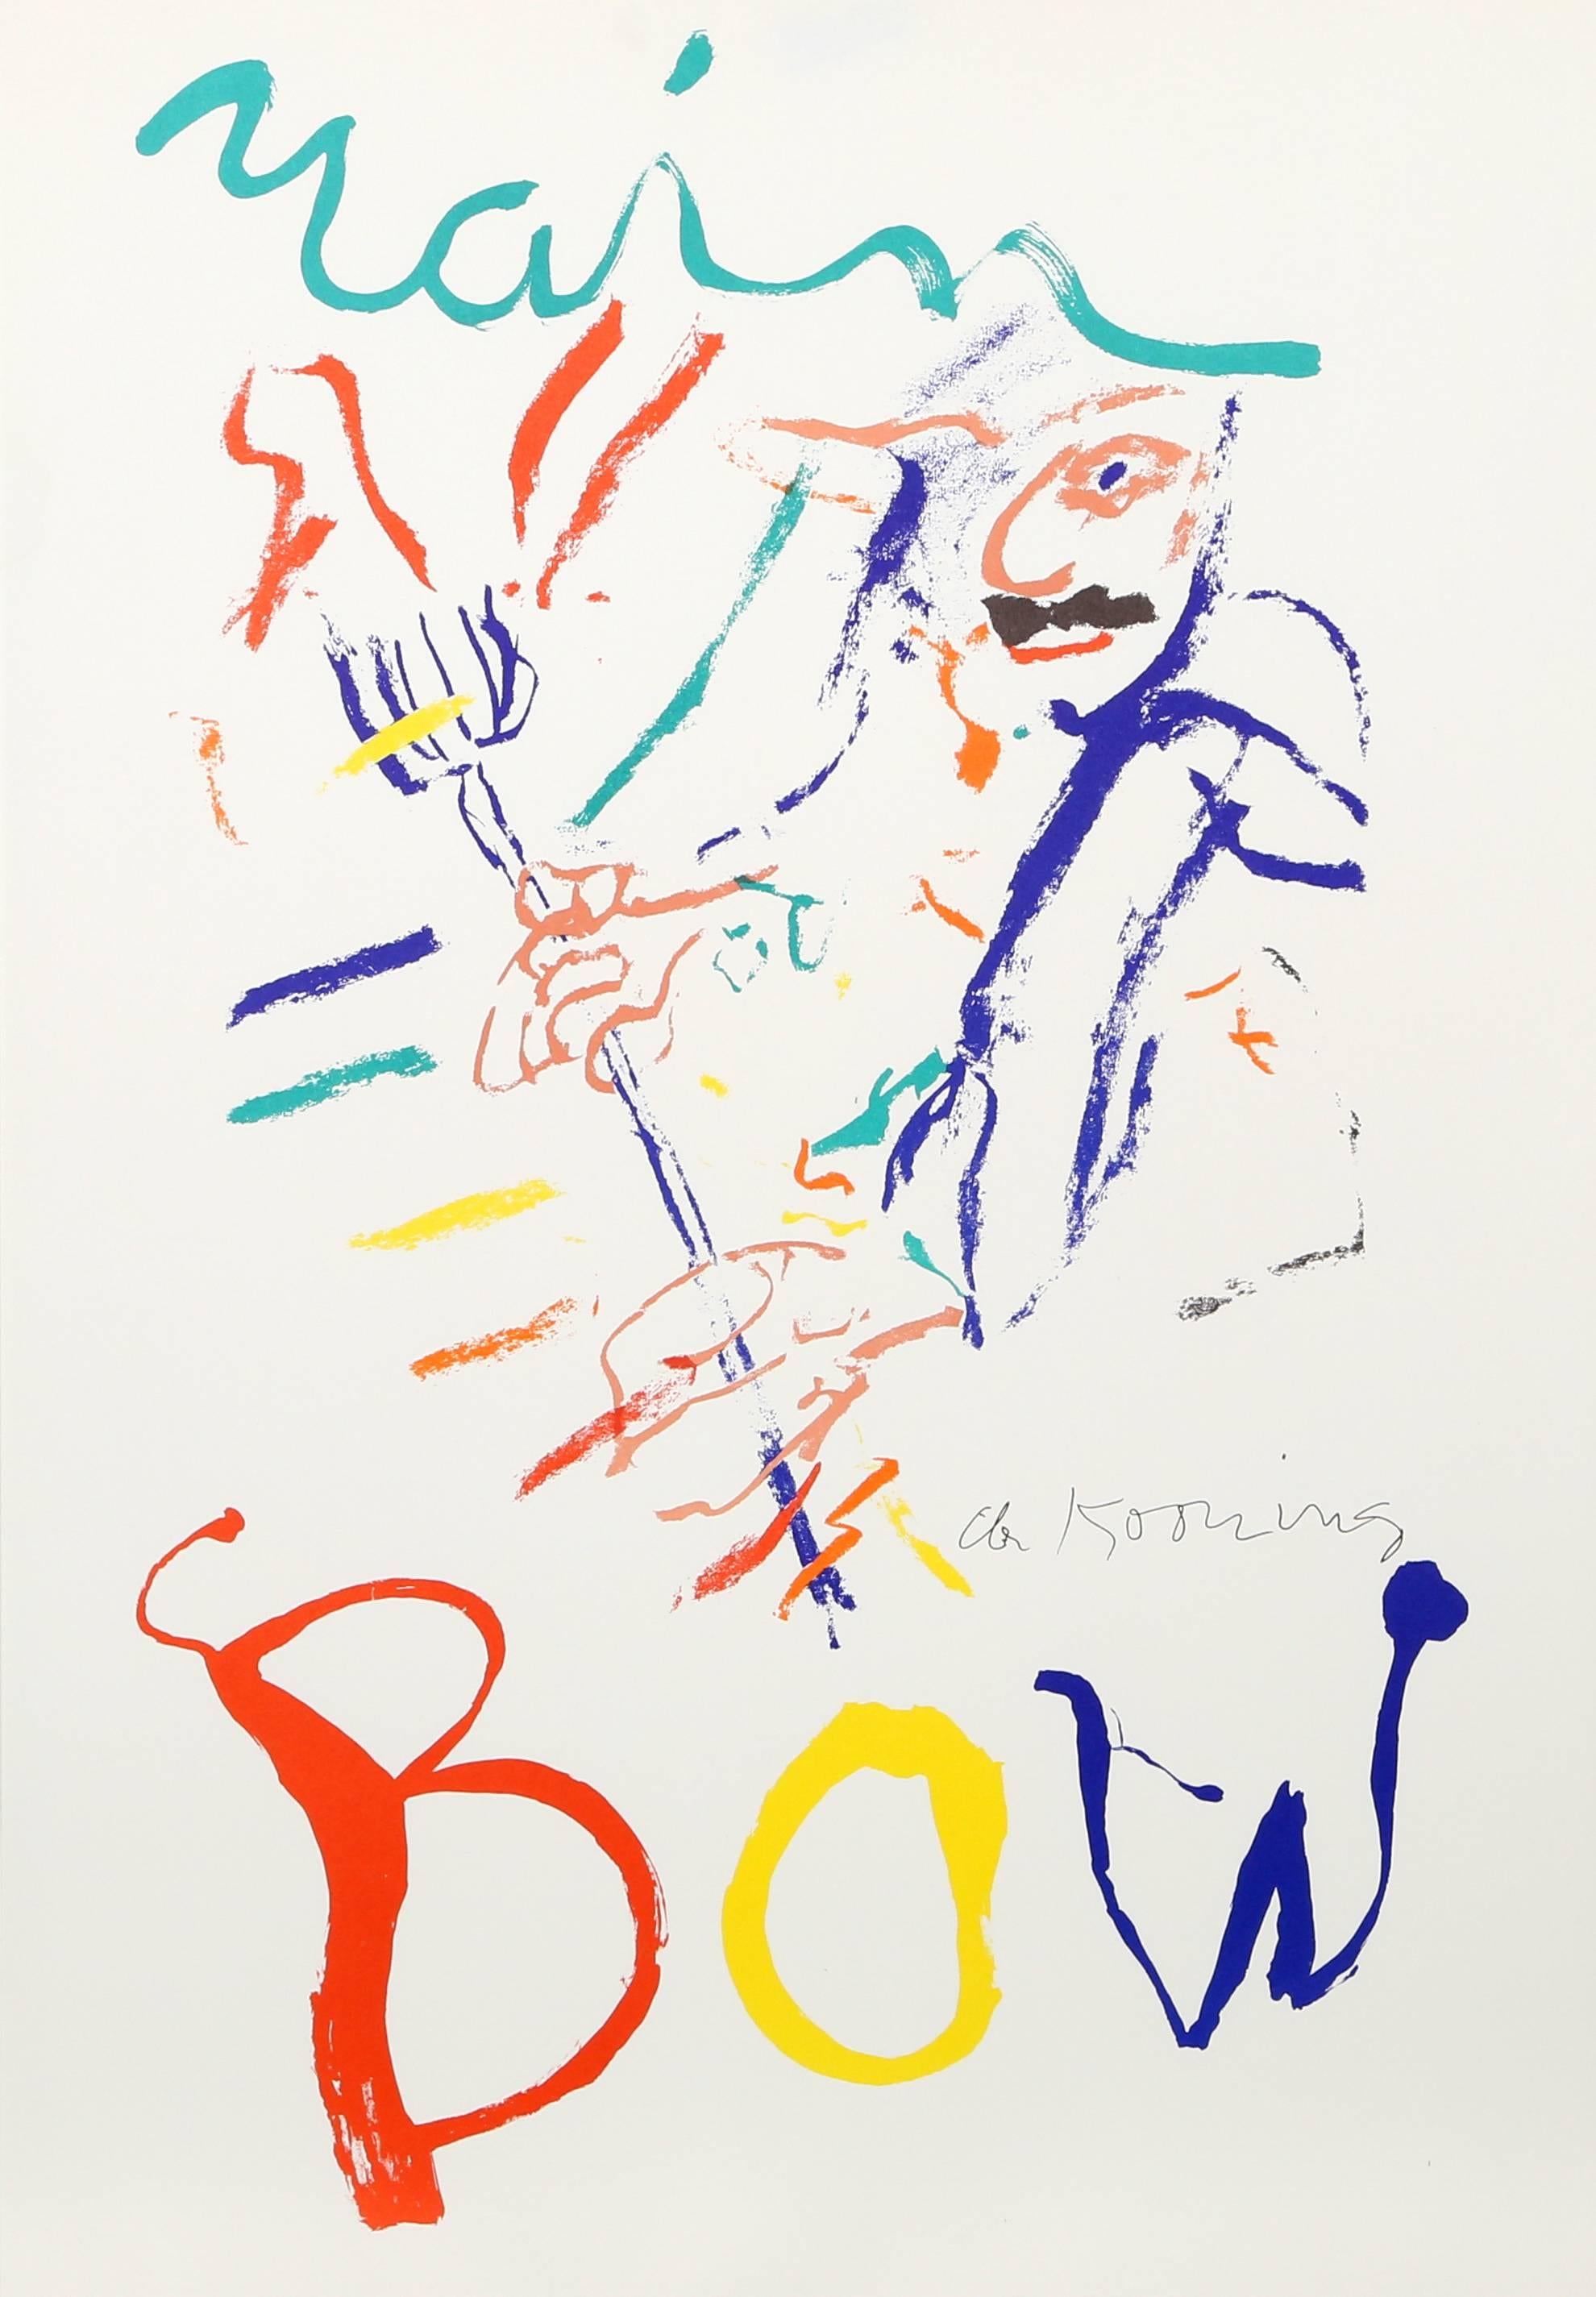 Willem de Kooning Abstract Print - Rainbow - Thelonius Monk - Devil at the Keyboard